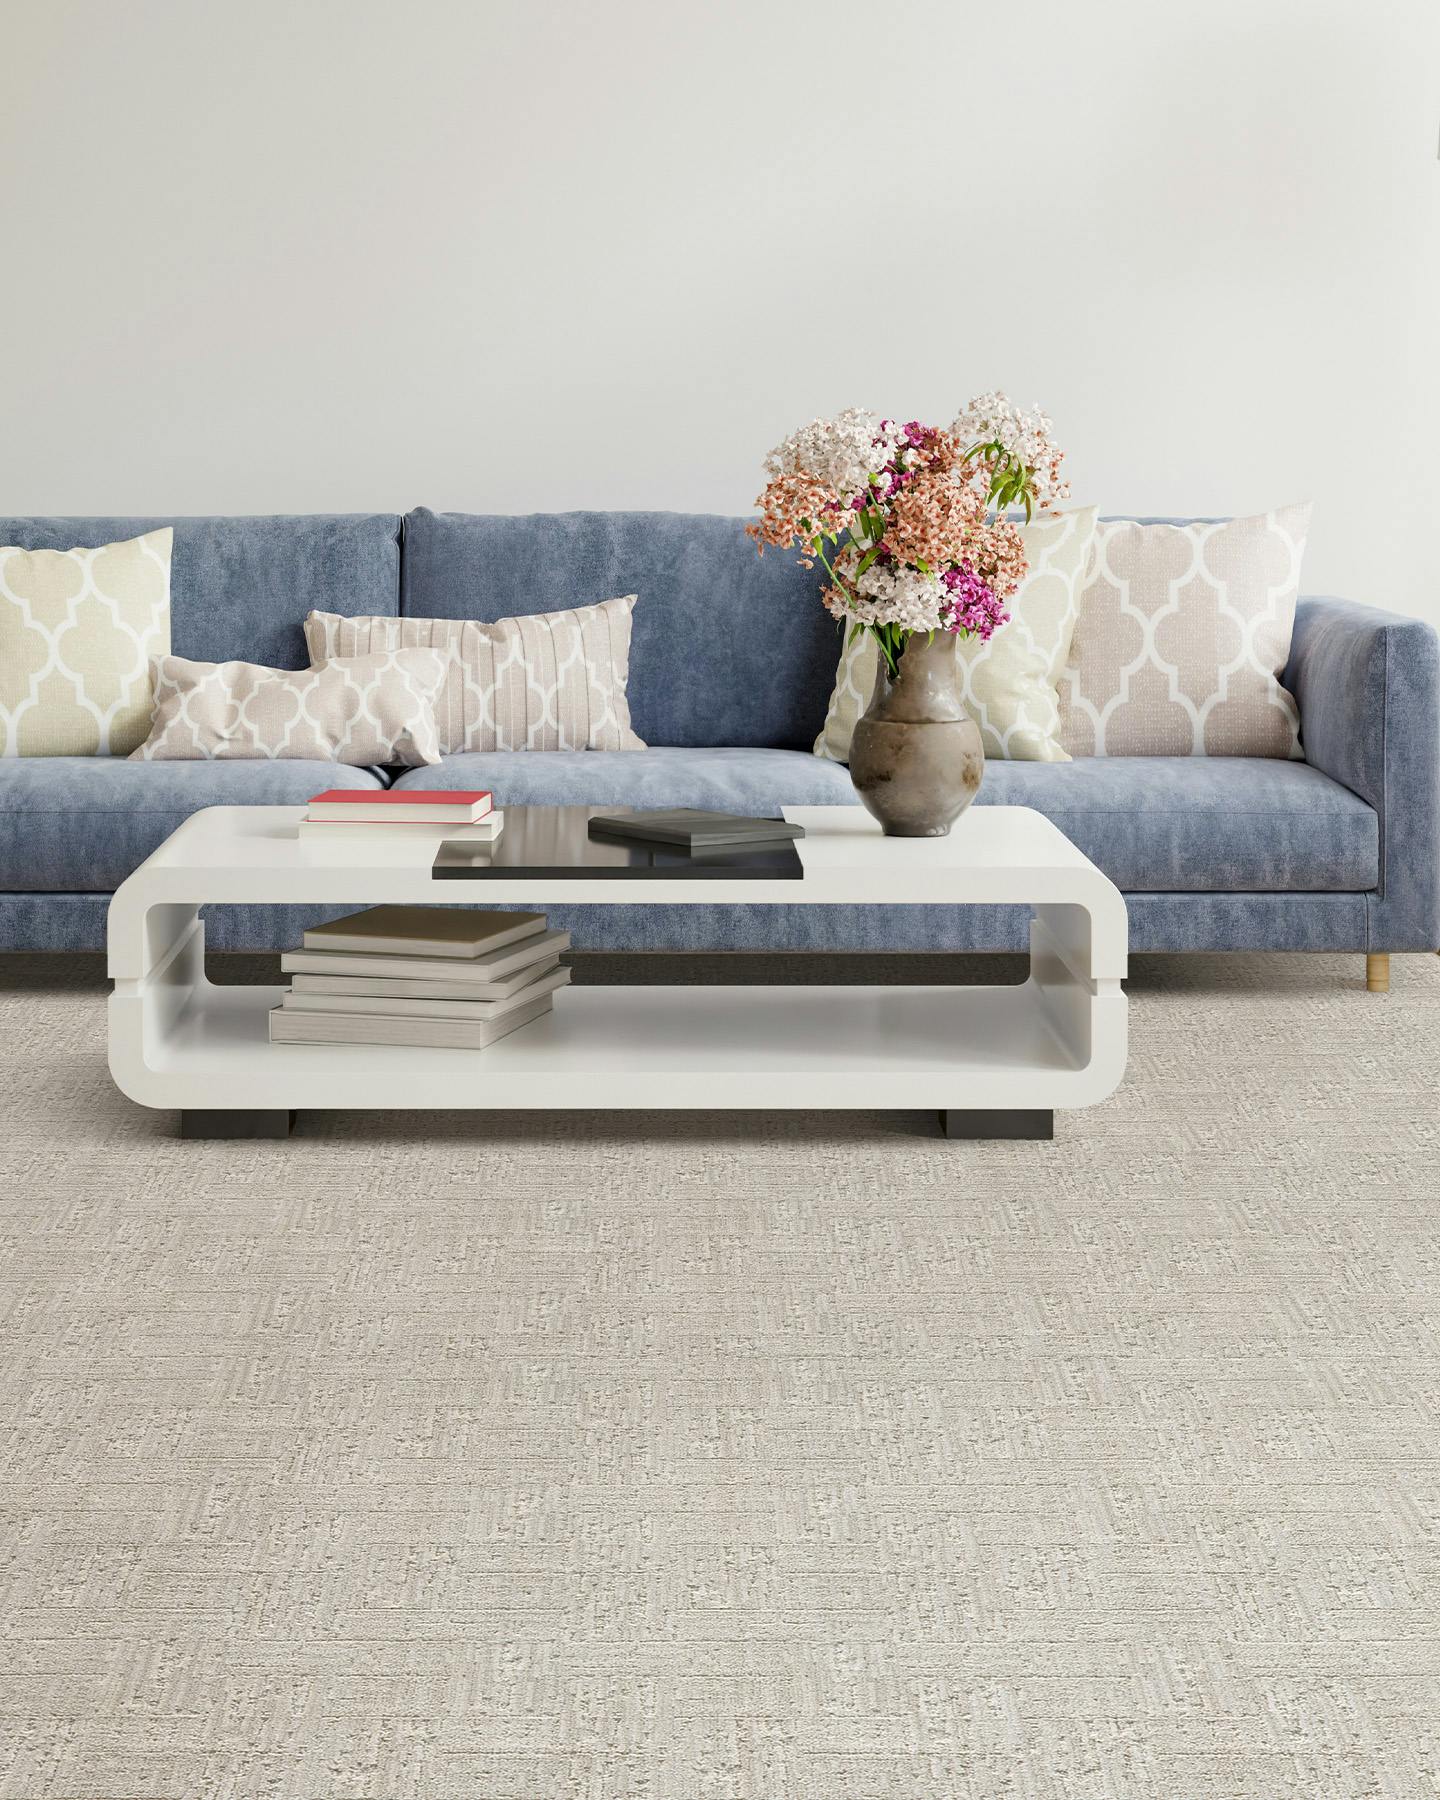 Hitari pale greige carpet style on floor of living room with soft blue couch, flowers, and a coffee table with books